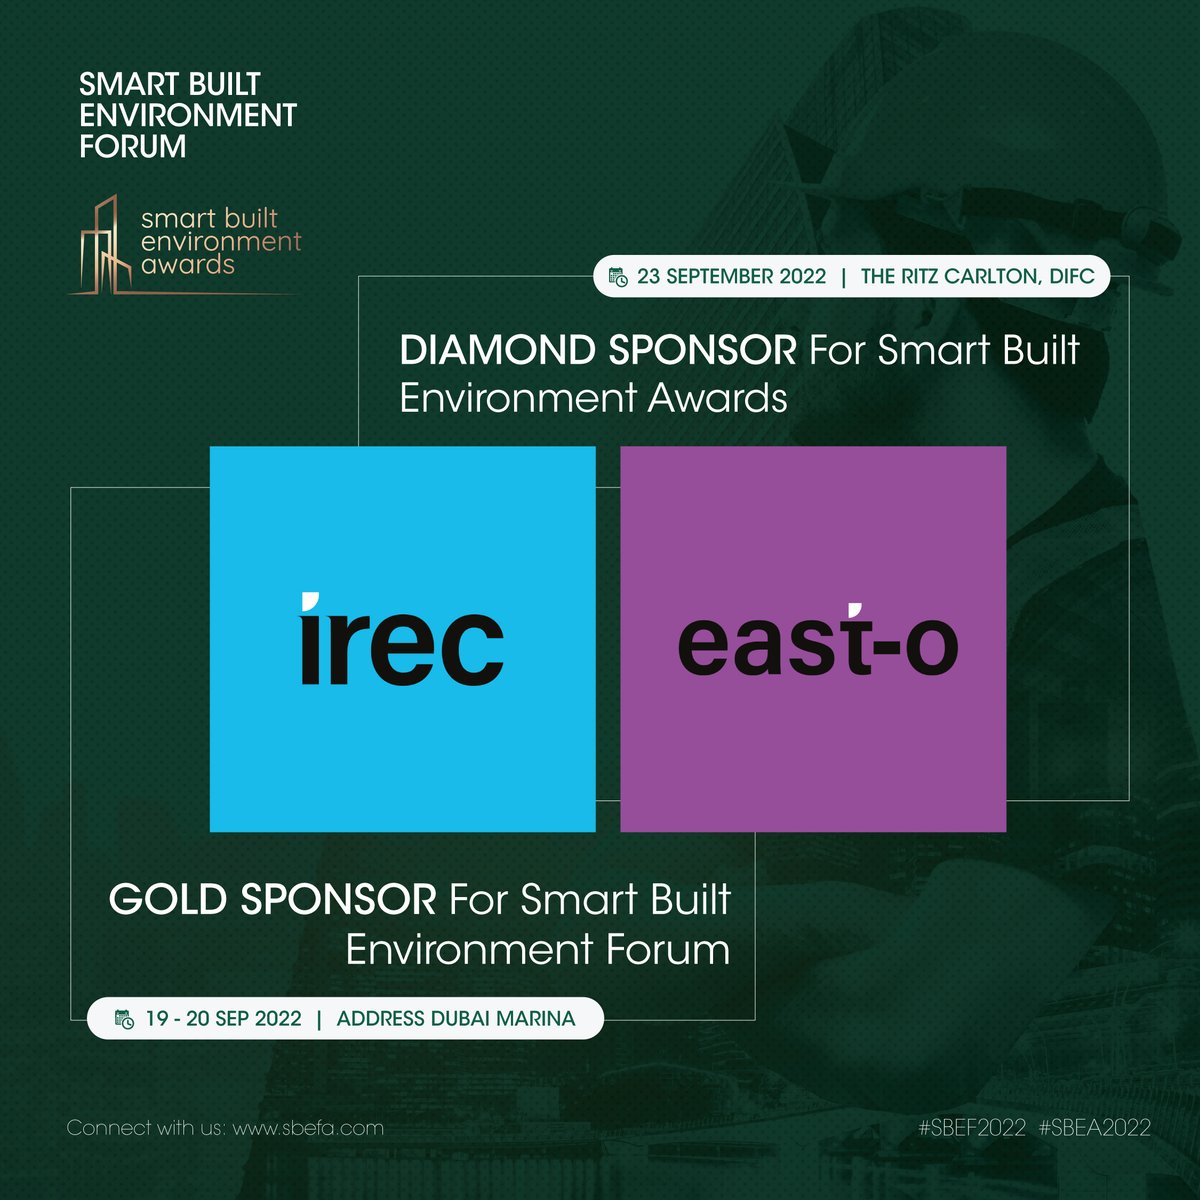 #SBEFA2022: Welcoming iREC & EAST-O by @Eltizamgroup as sponsors for the Smart Built Environment Awards & Forum! 

For details, visit: bit.ly/3y8WkU0

#proptech #realestate #communitymanagement #propertymanagement #builtenvironment #technology #infrastructure #building